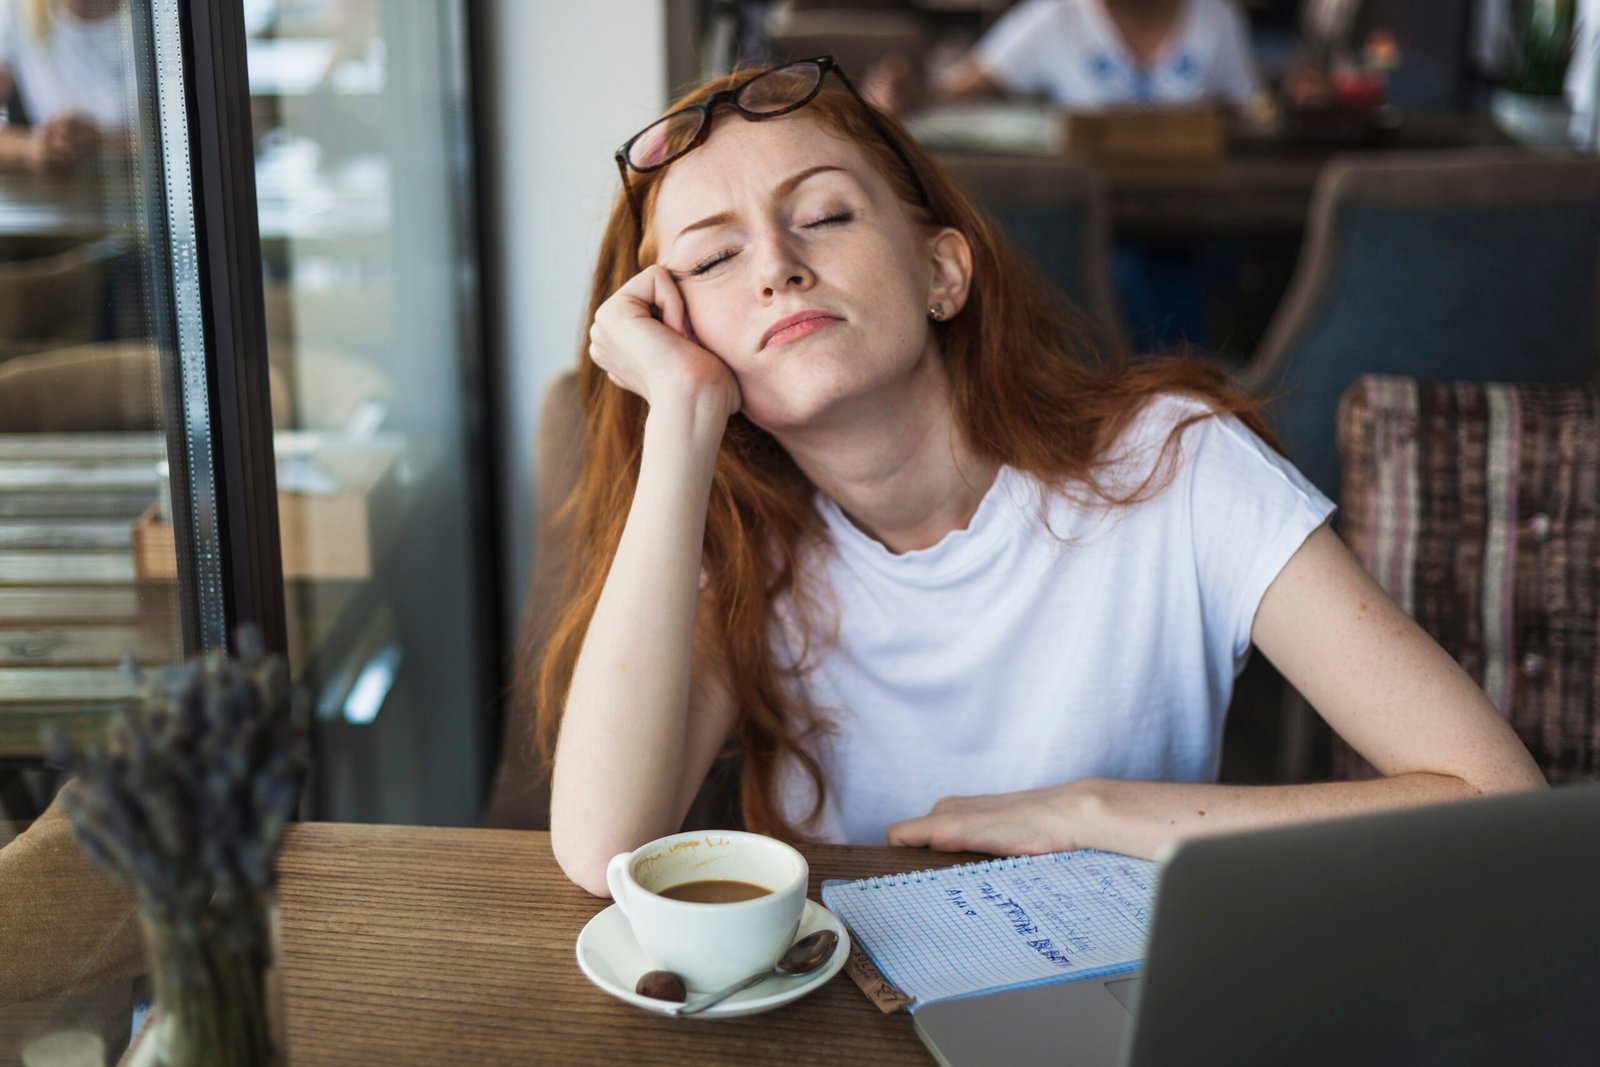 Is Your Sleep Affected? Understand How Long Does Caffeine Last